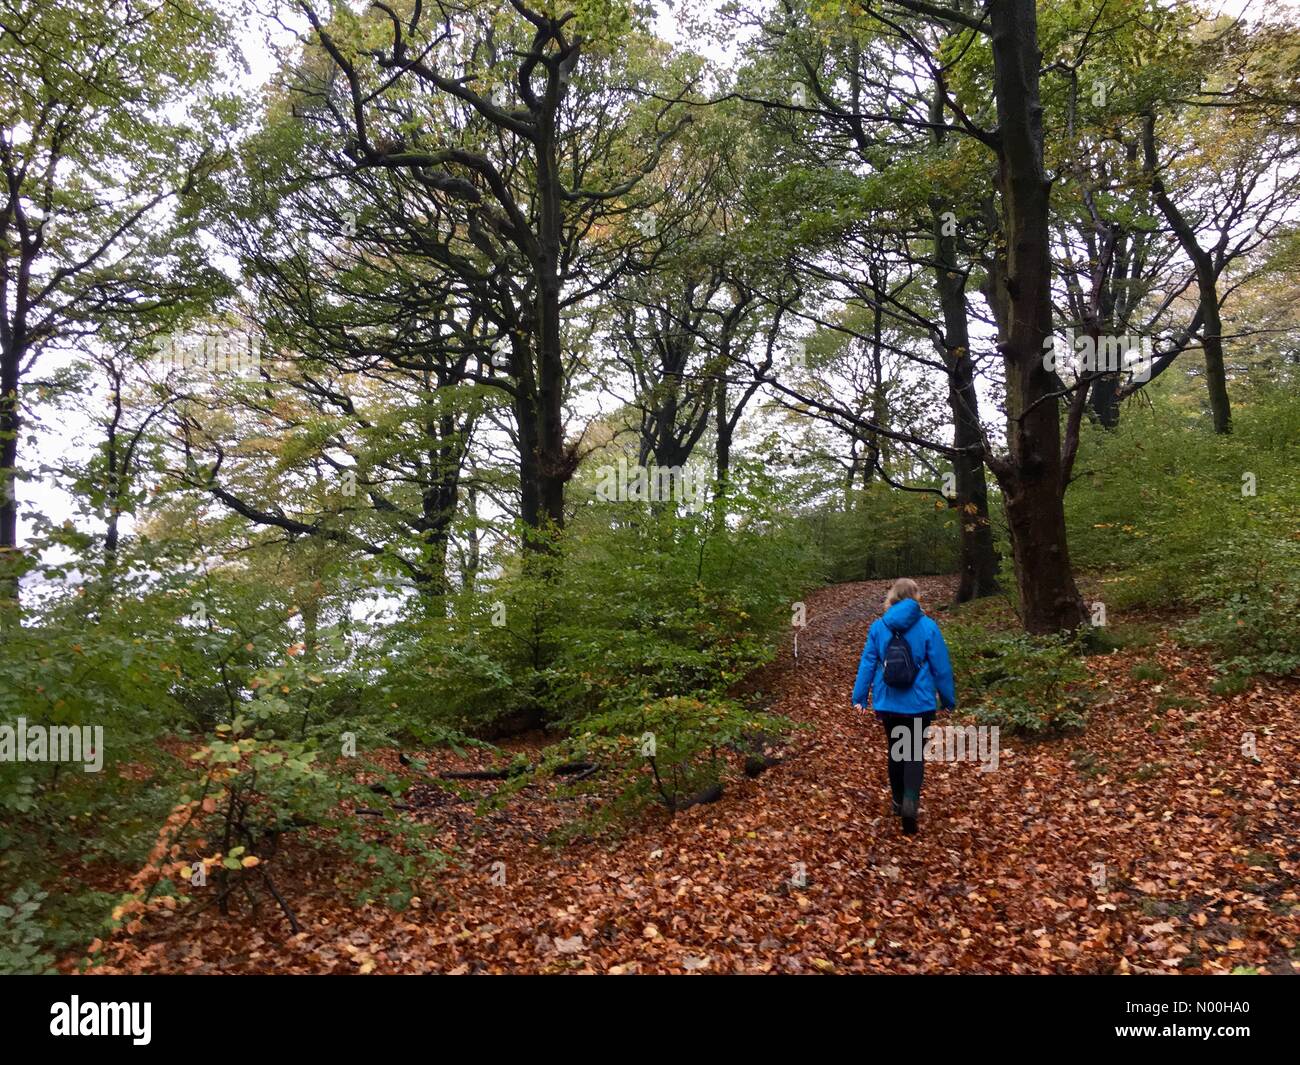 UK Weather: Overcast and drizzle in Chorley, Lancashire. Walking in Anglezarke near Chorley on a dull and damp Autumn dayovercast Stock Photo